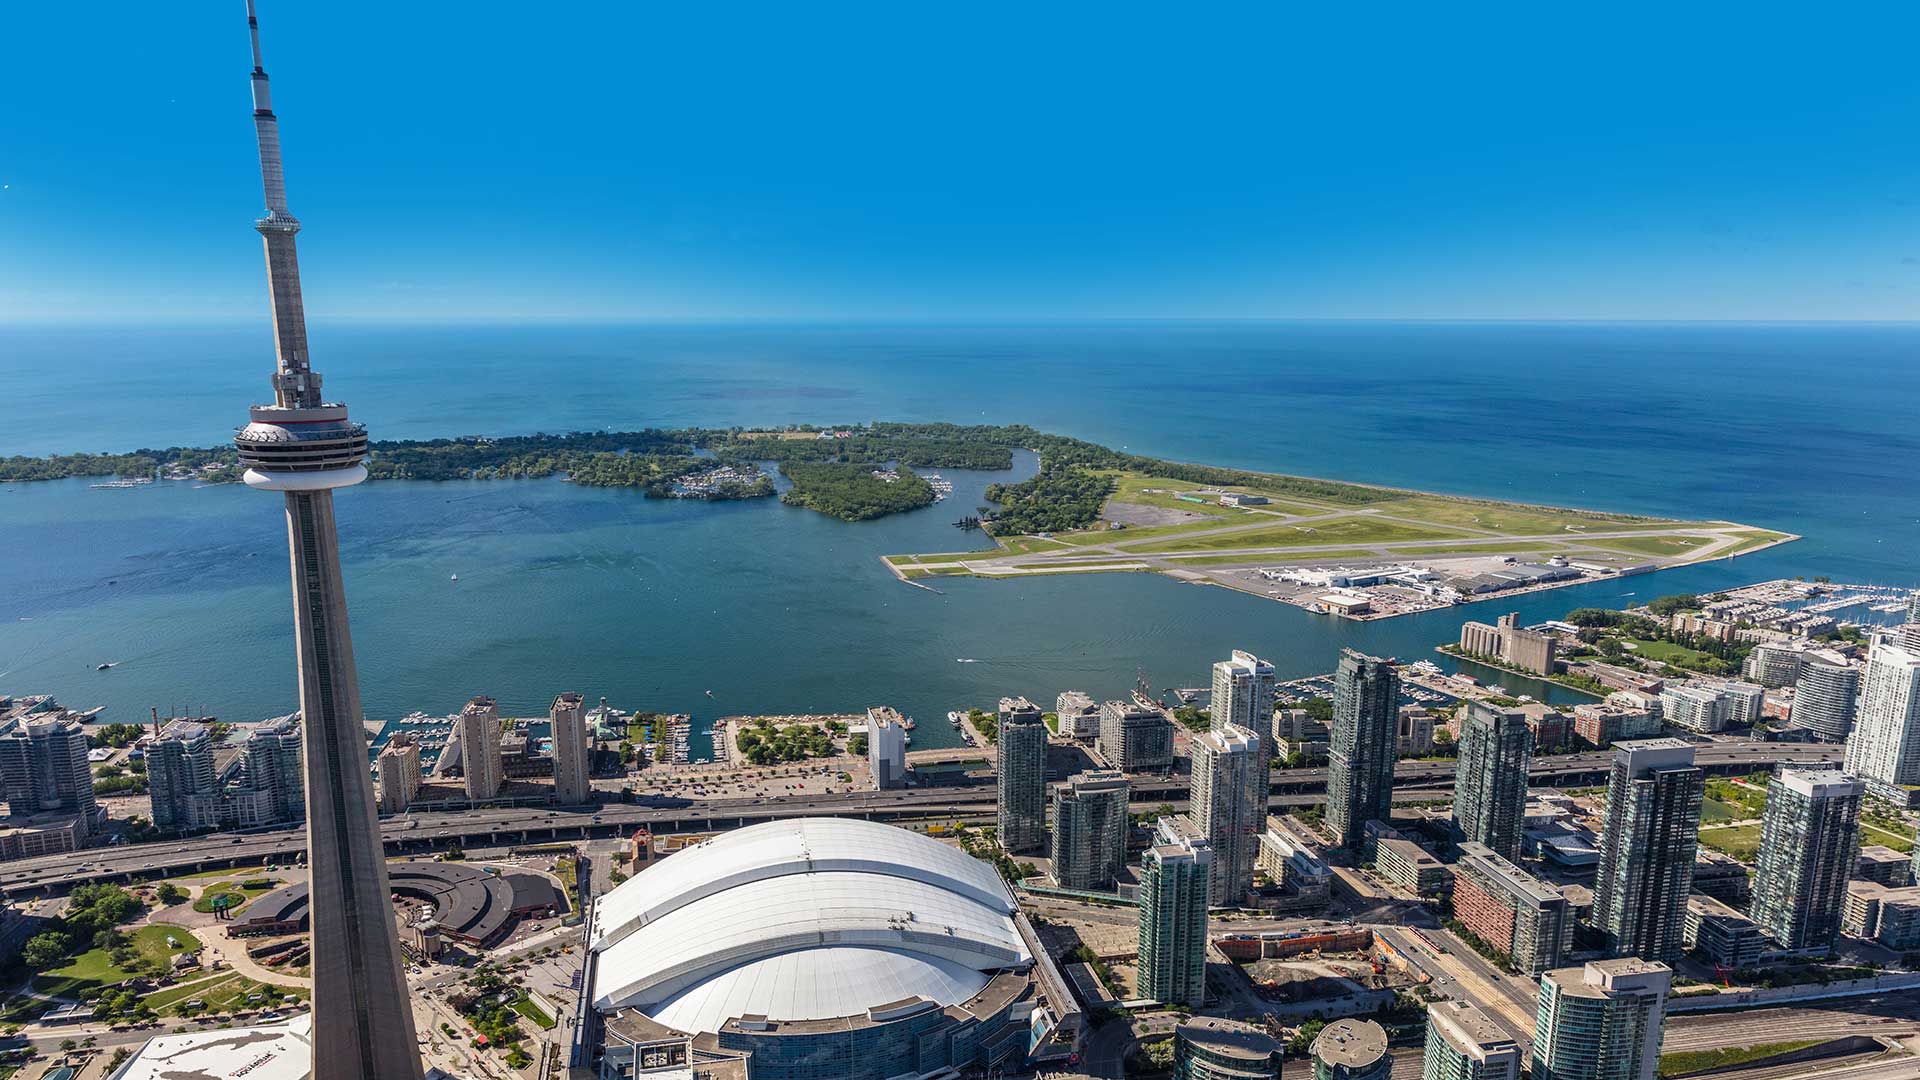 Billy Bishop Toronto City Airport Launches Advertising Campaign Featuring its own Passengers, Staff and Partners